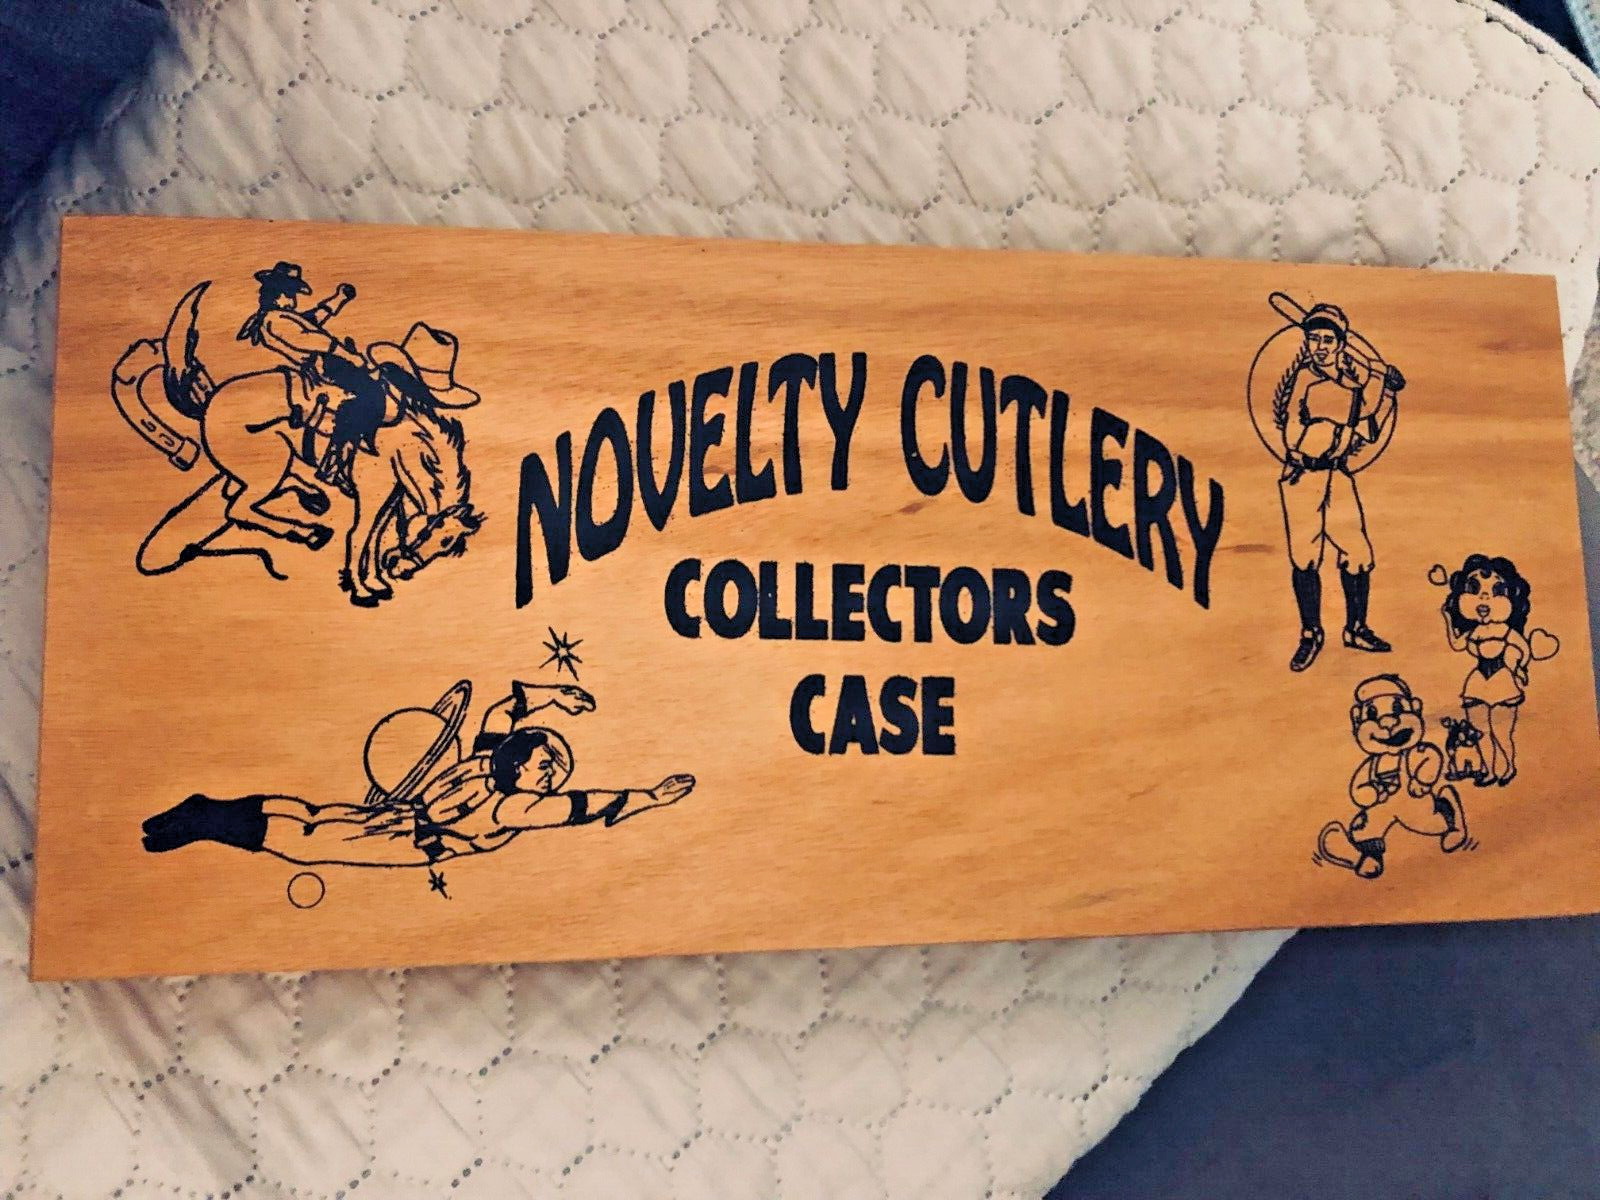 Vintage novelty cutlery collectors case with pocket knives